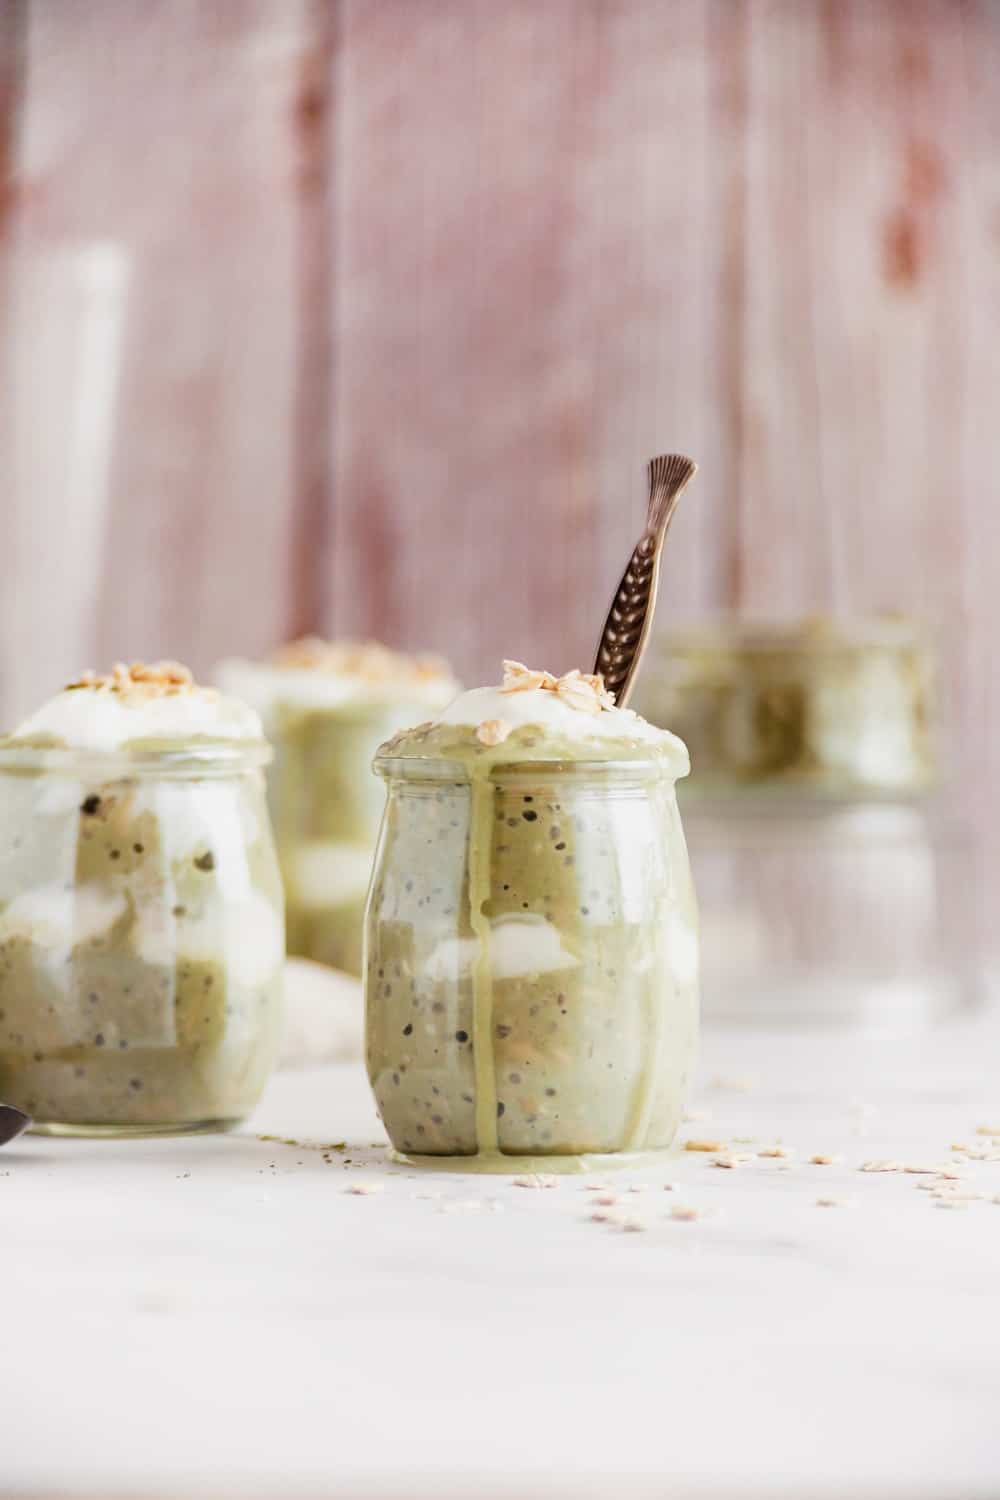 A glass jar of matcha overnight oats with a little spilling out over the edge.